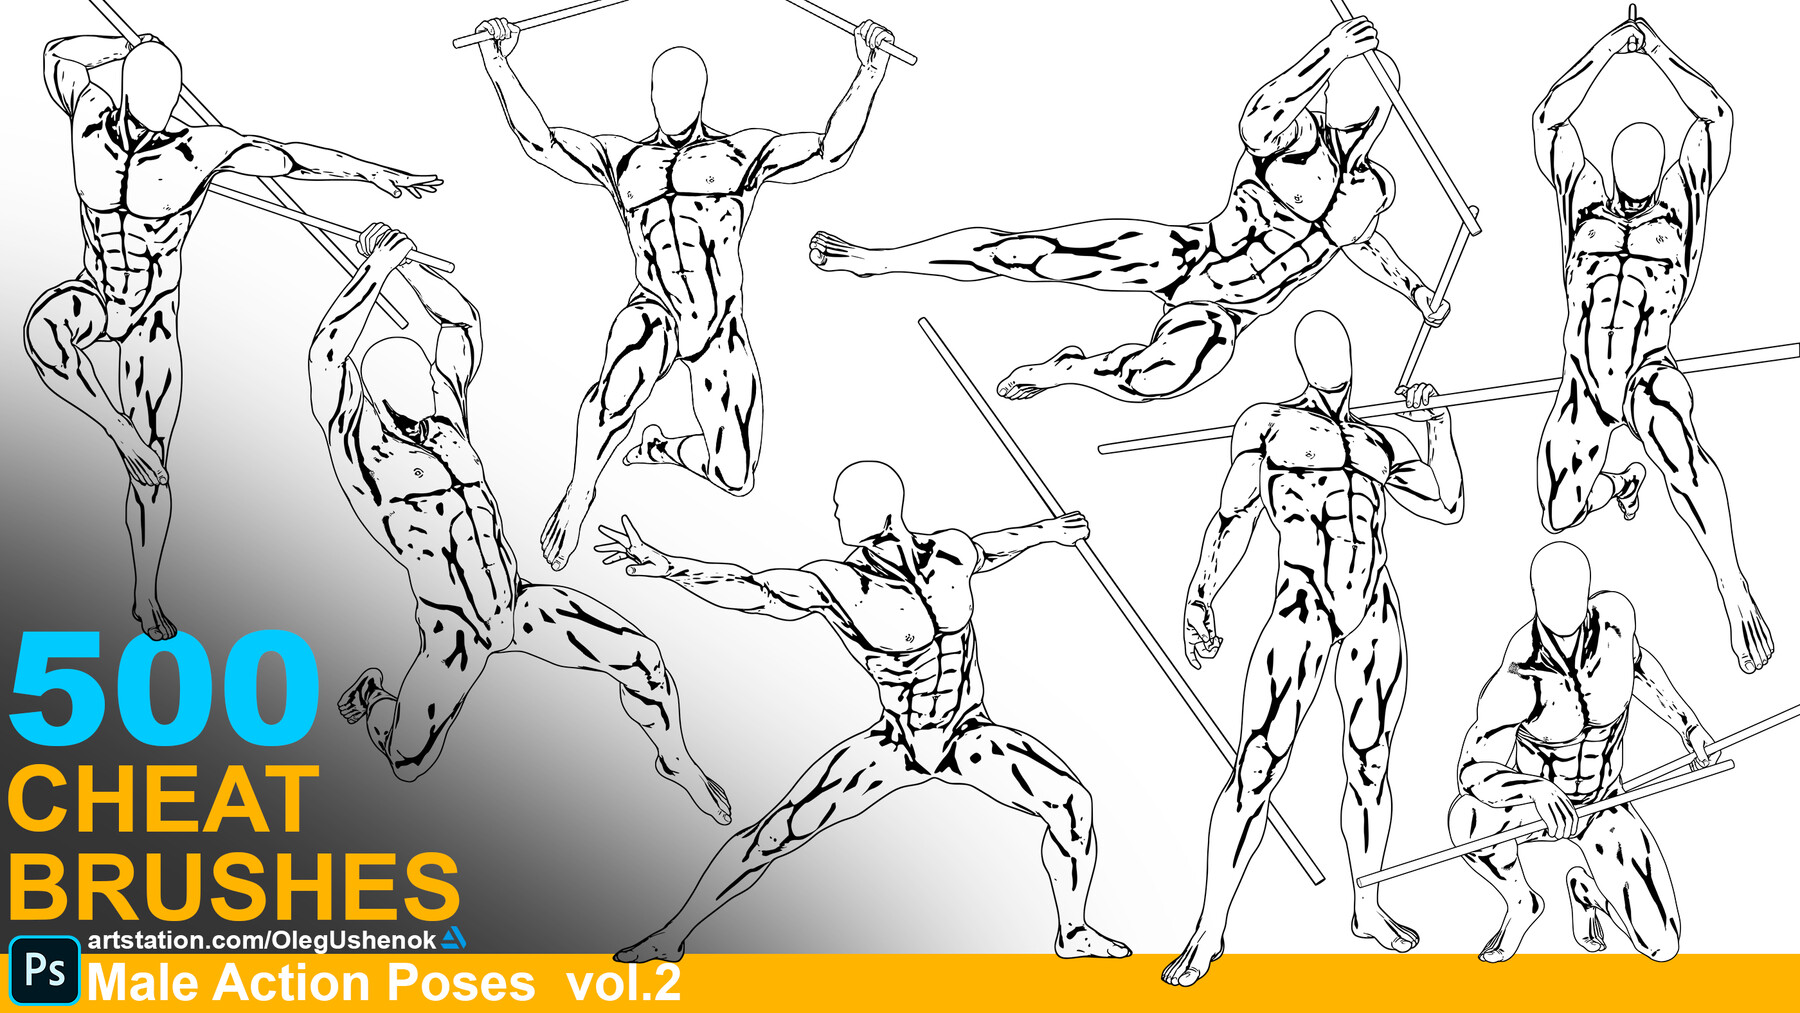 LEARN HOW TO DRAW: ANATOMY &... - Luis Figueiredo Art | Facebook